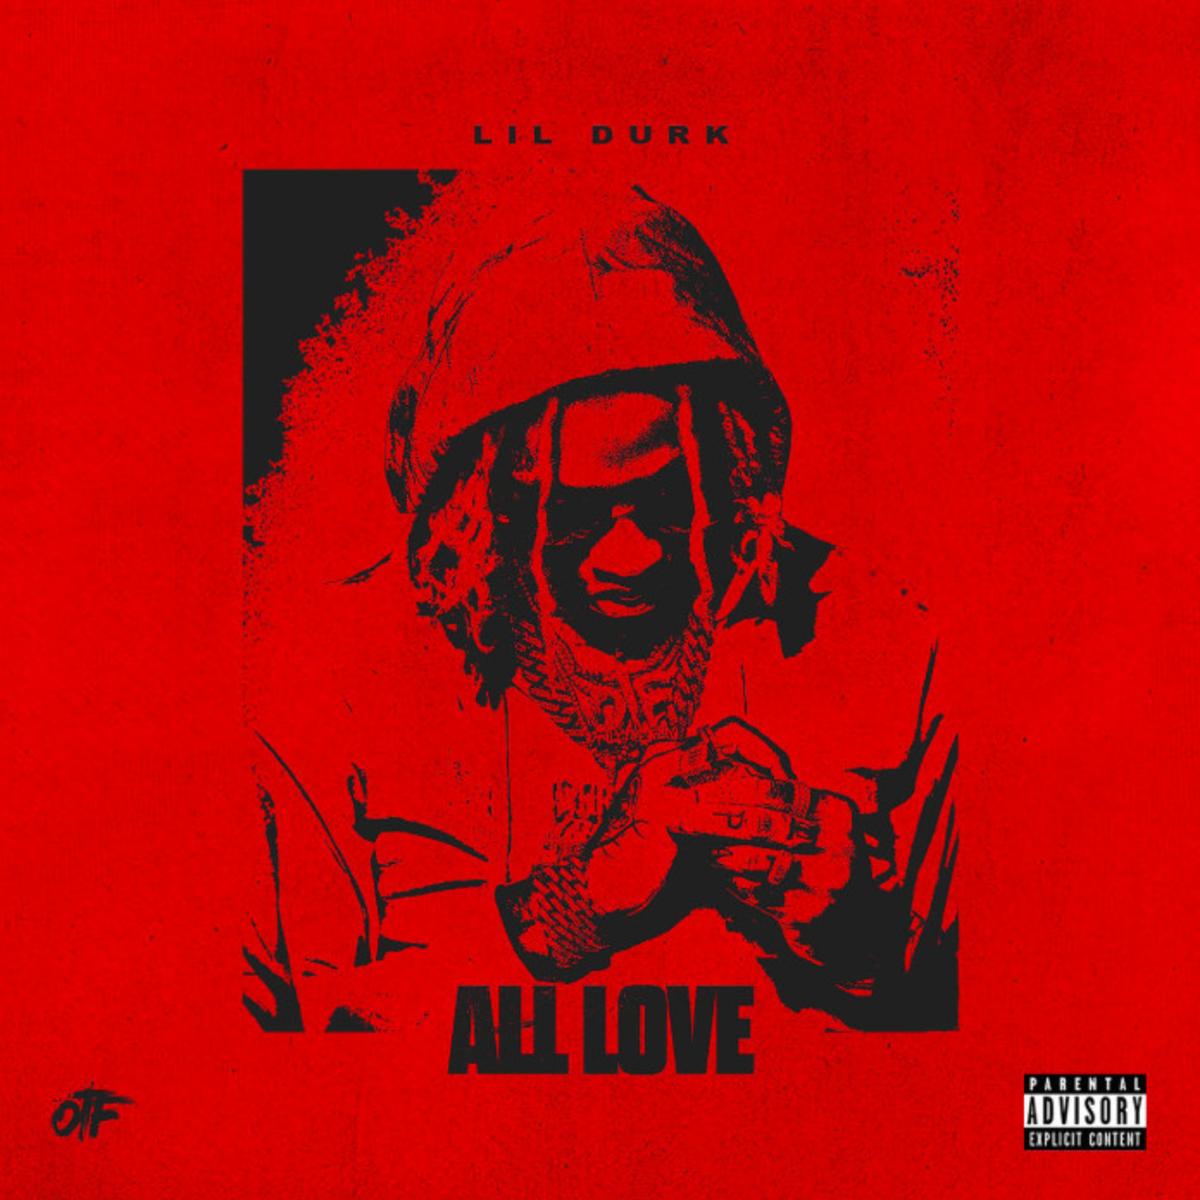 Lil Durk Gets Deep On “All Love”